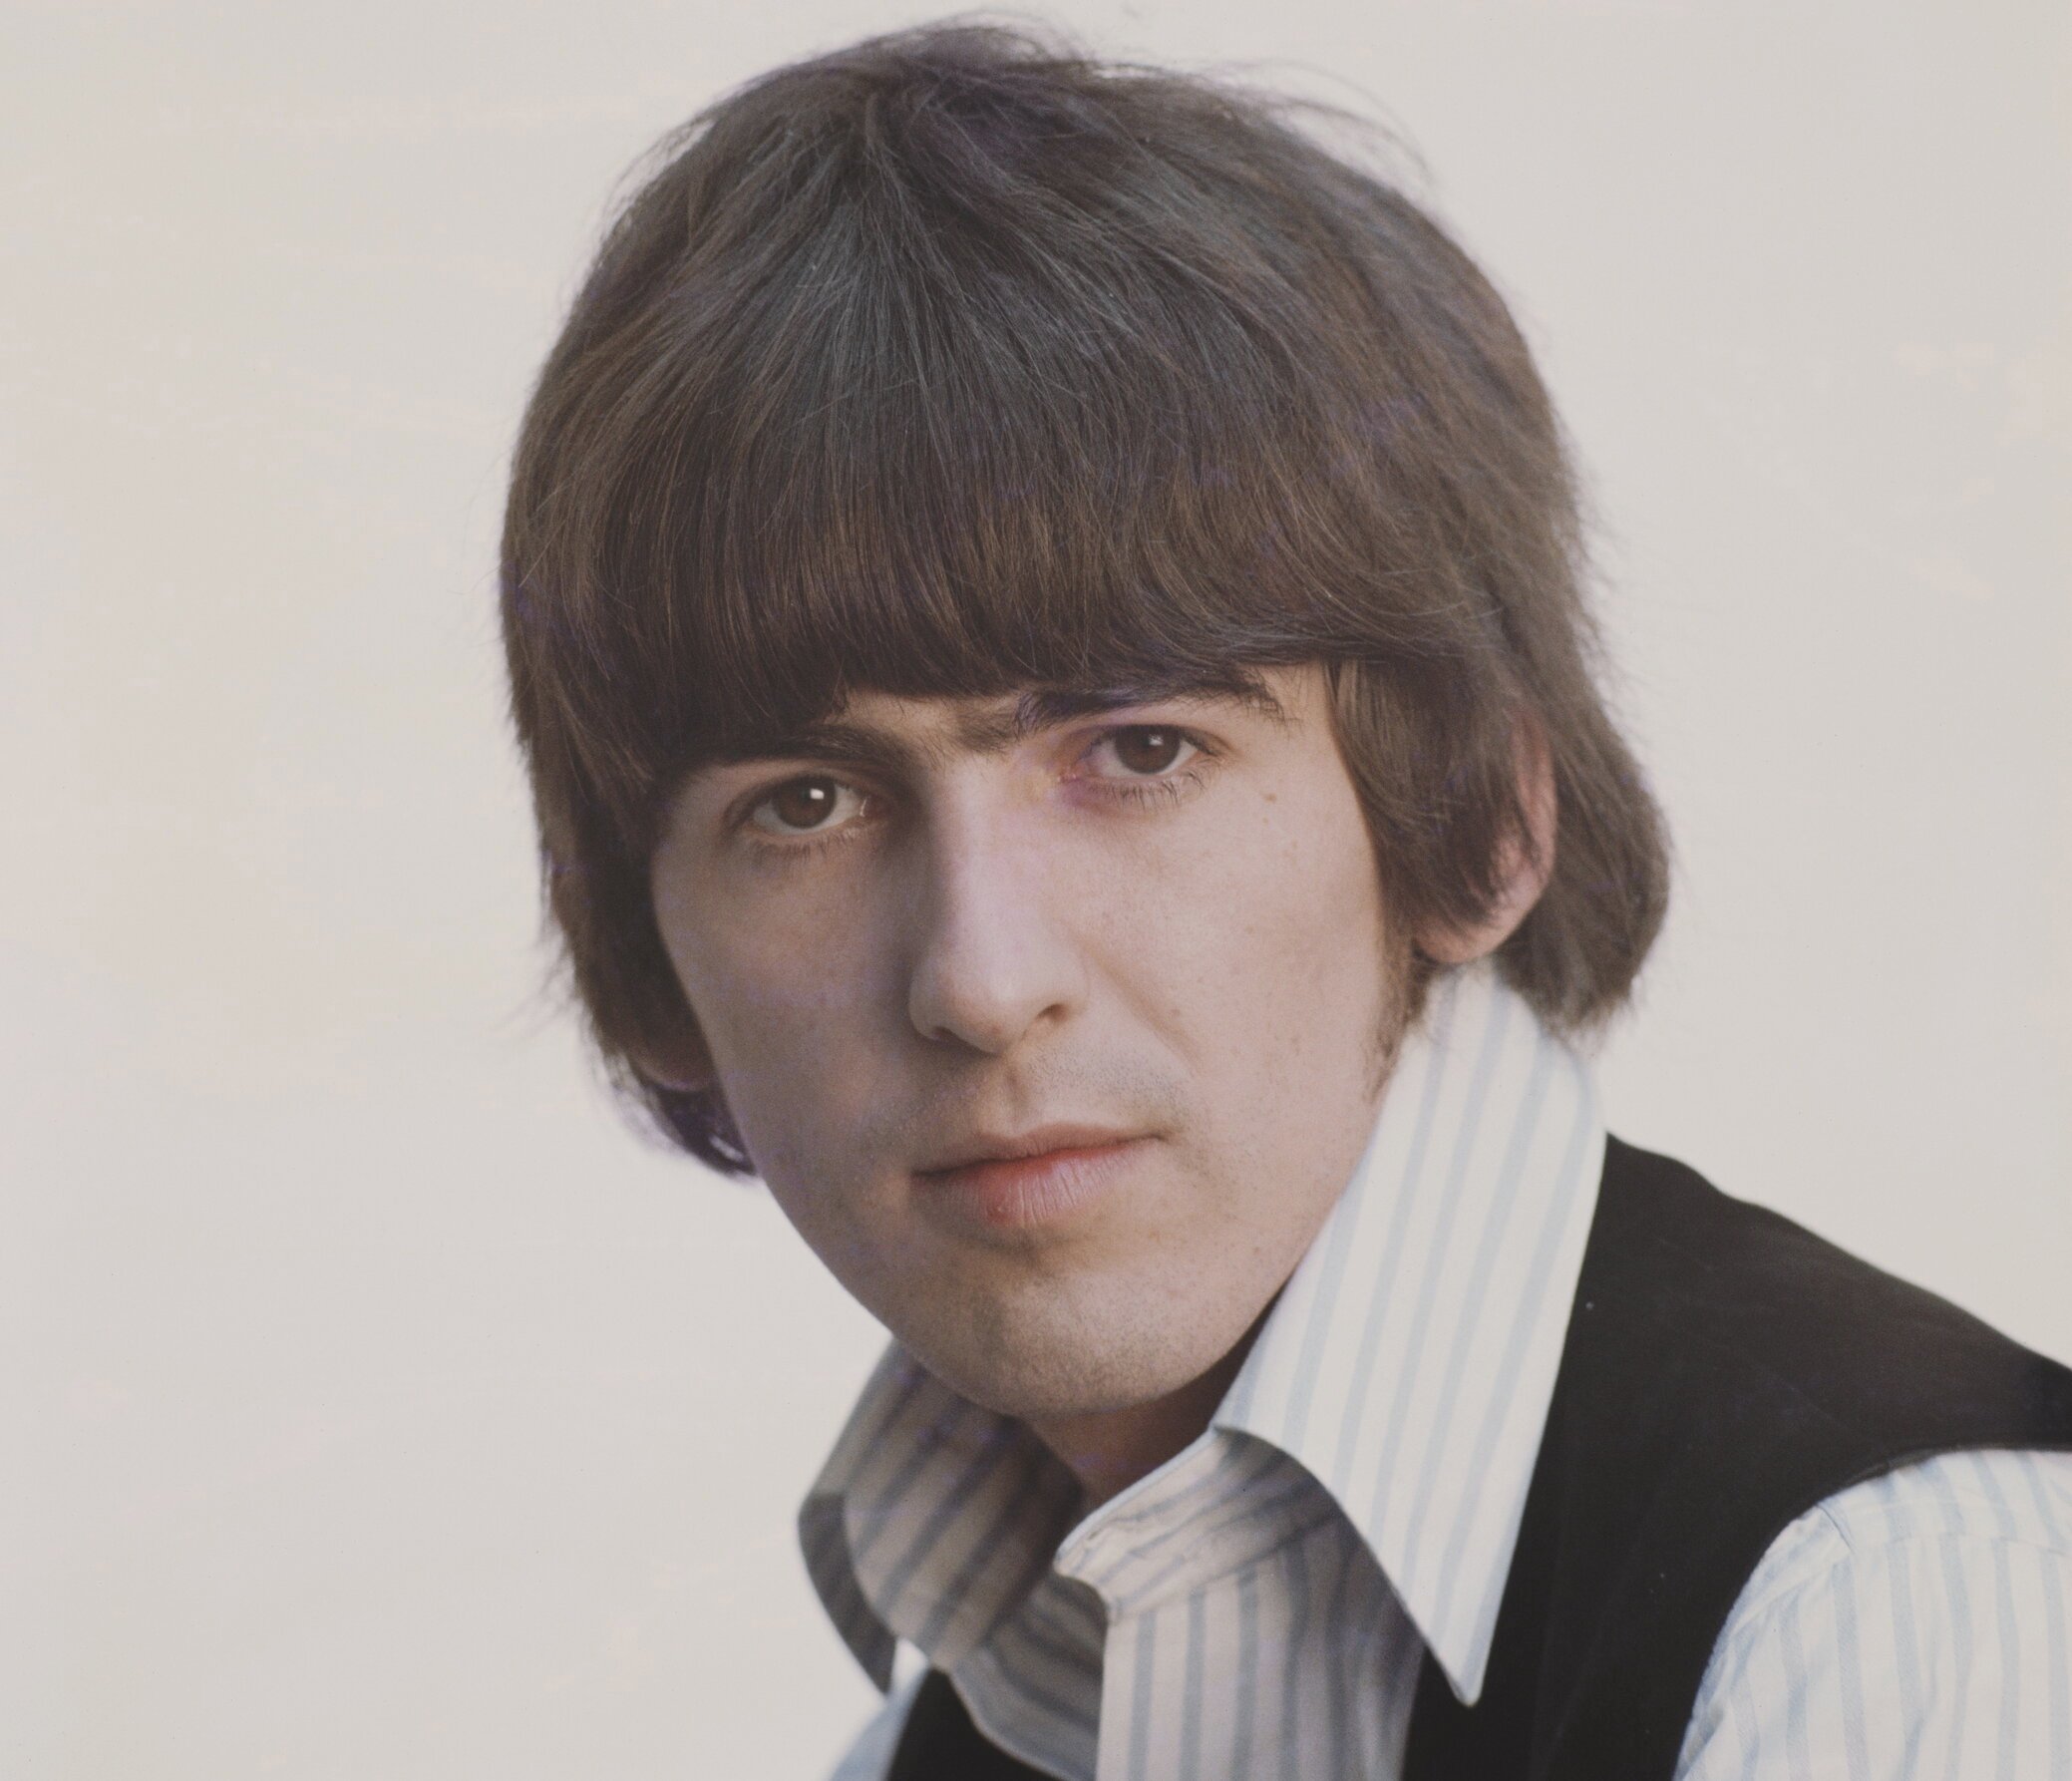 Posed studio session of George Harrison (1943-2001) from The Beatles in 1965.